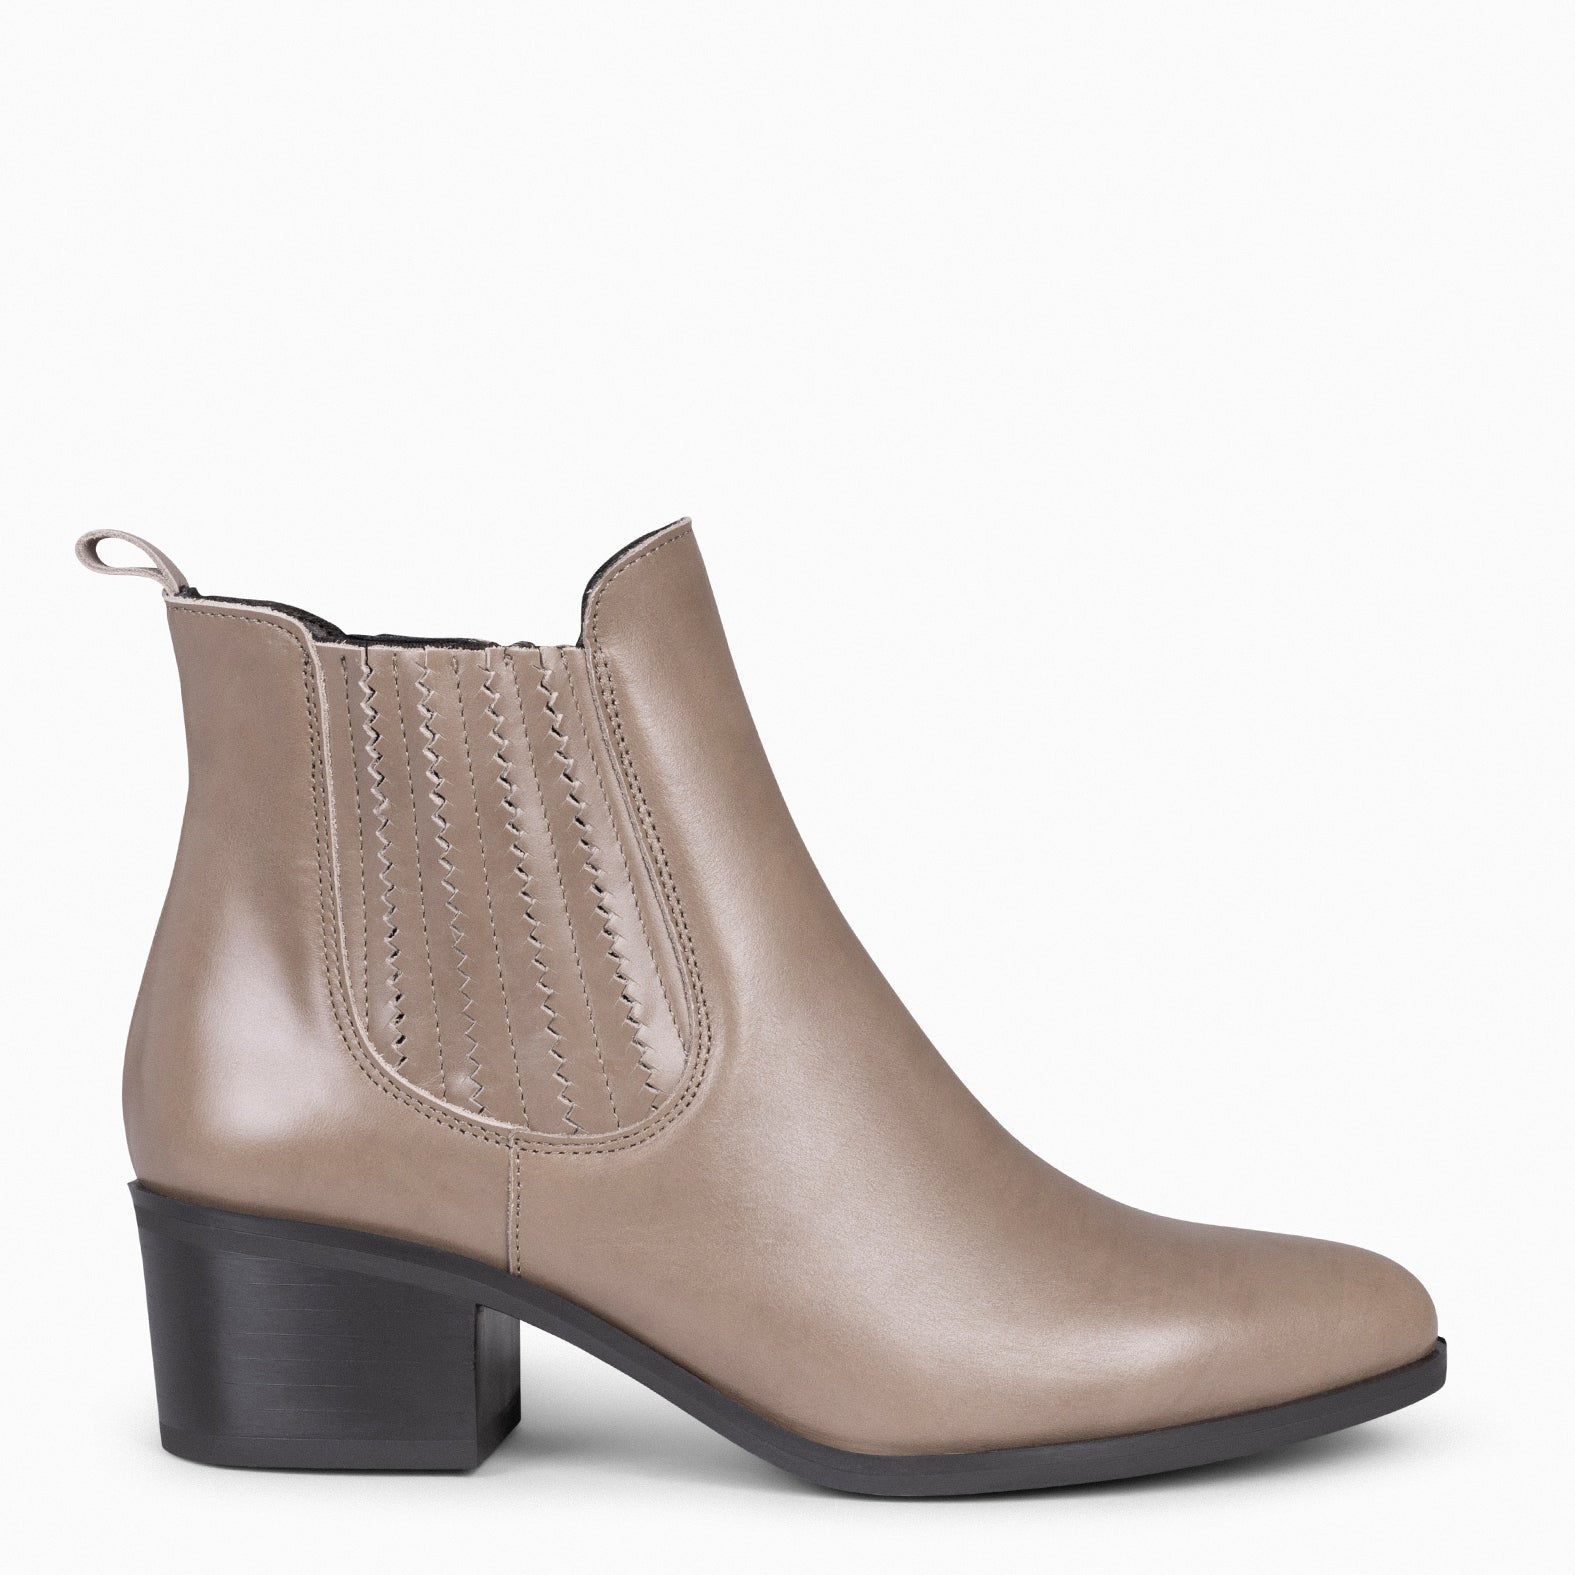 SHELLY – TAUPE Country Women  Booties